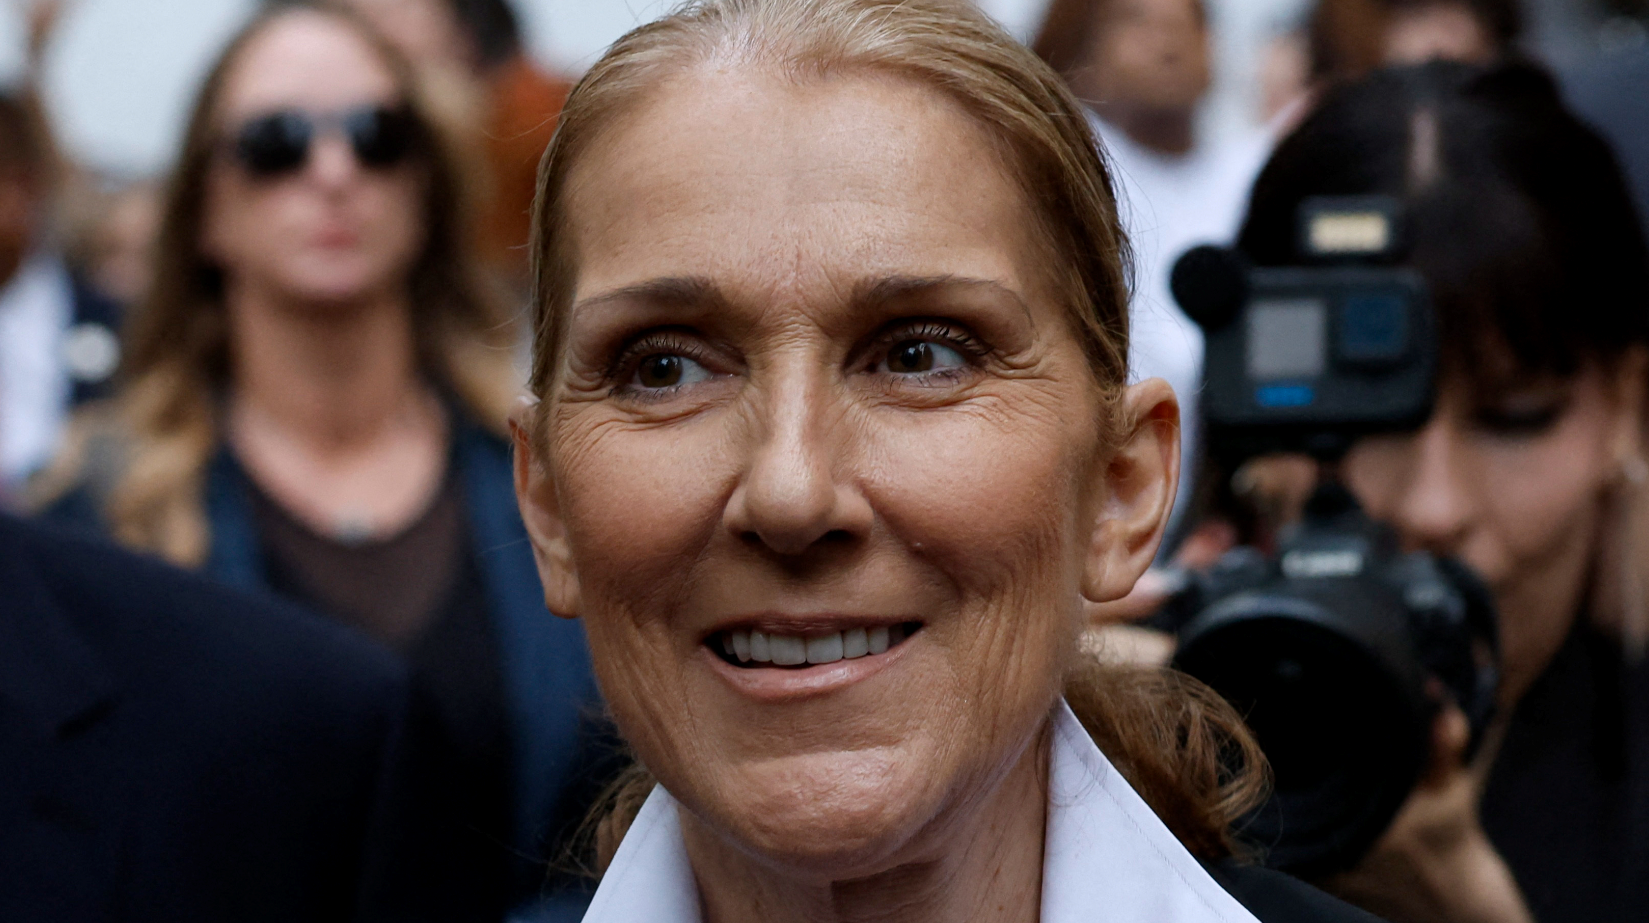 Celine Dion at Olympics would be great, Macron says